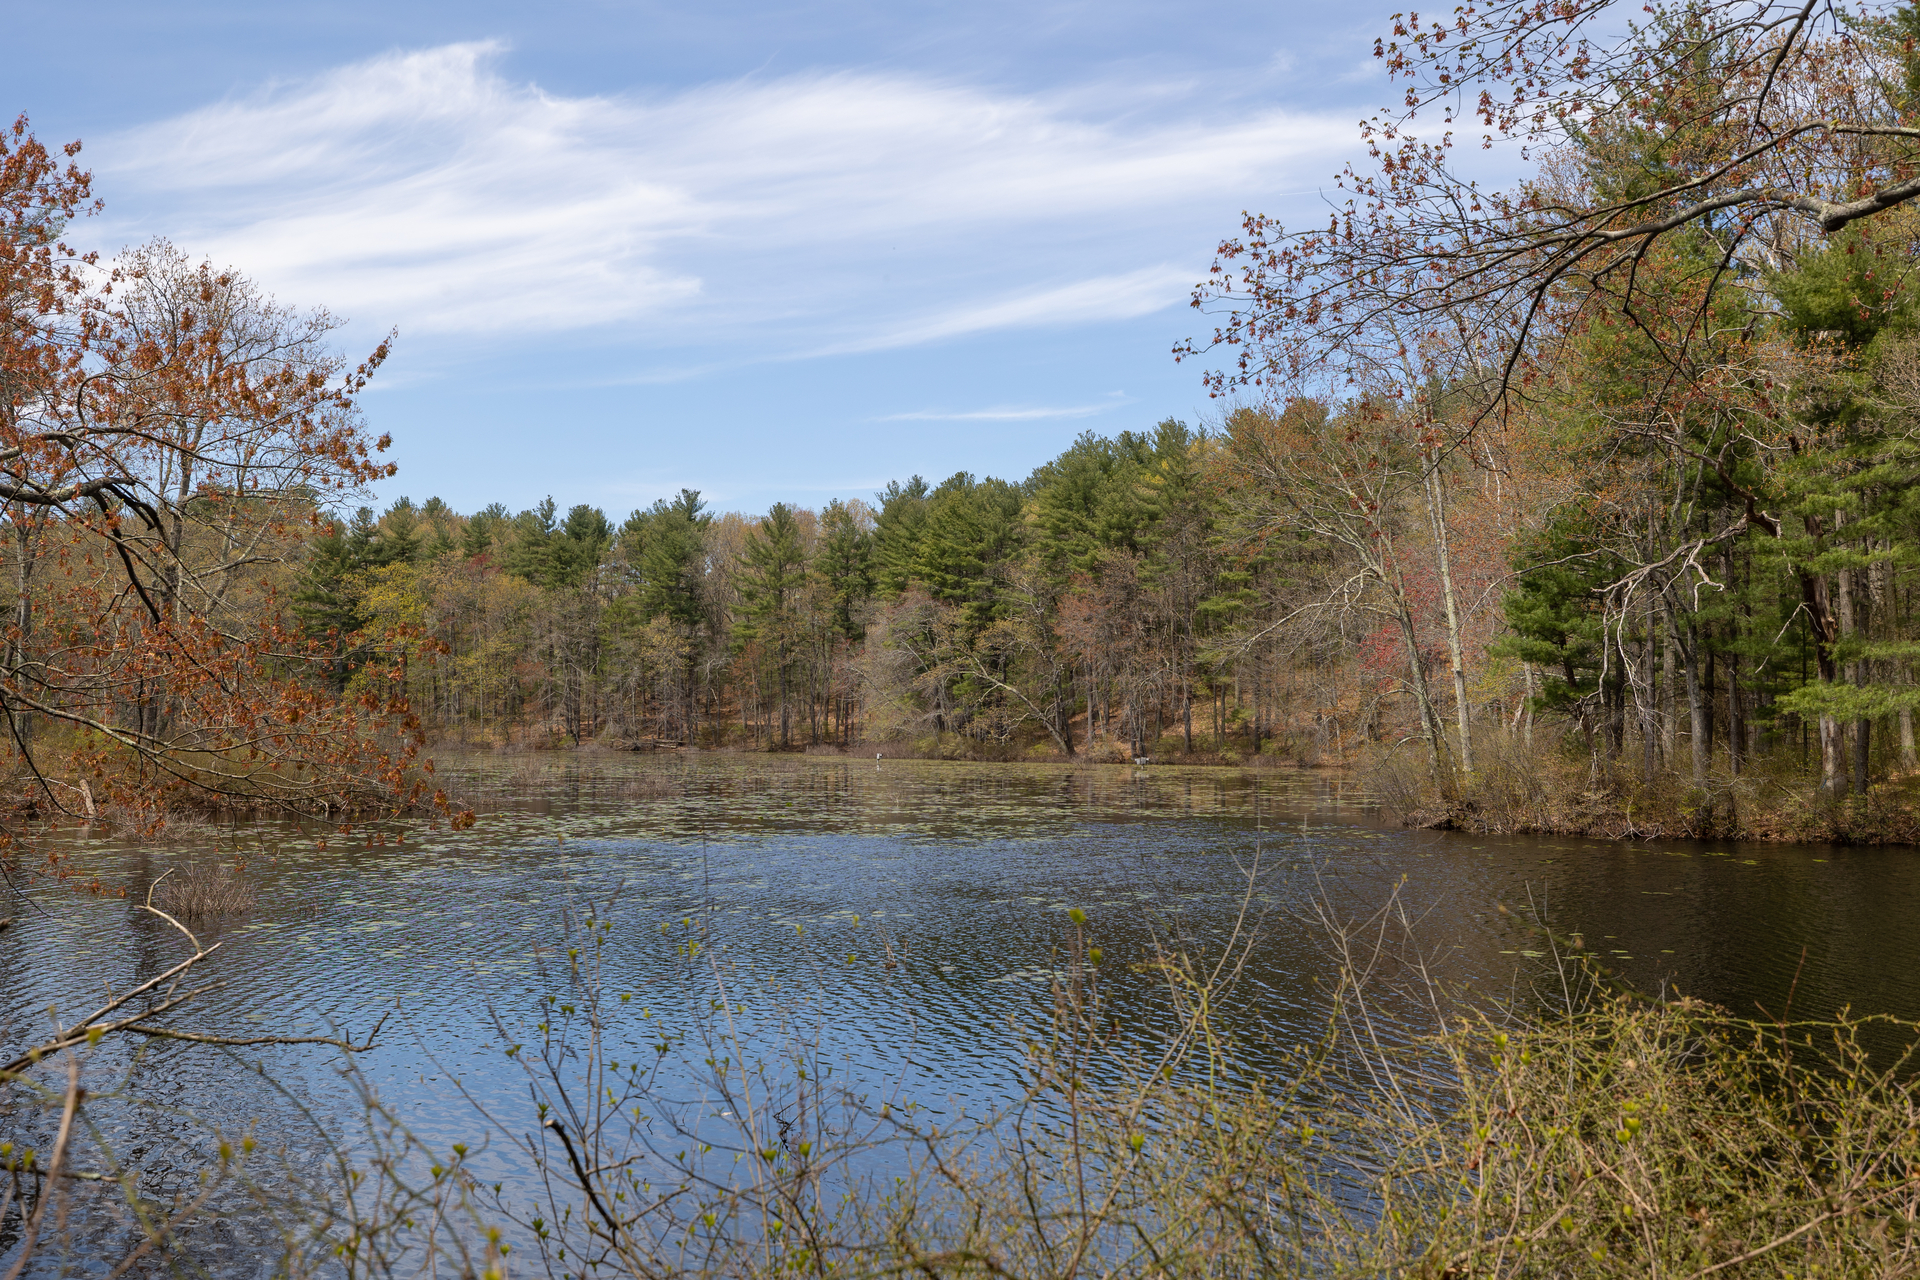 A pond with scattered Lily Pads. Bare trees and pine trees line the edges of the bank.